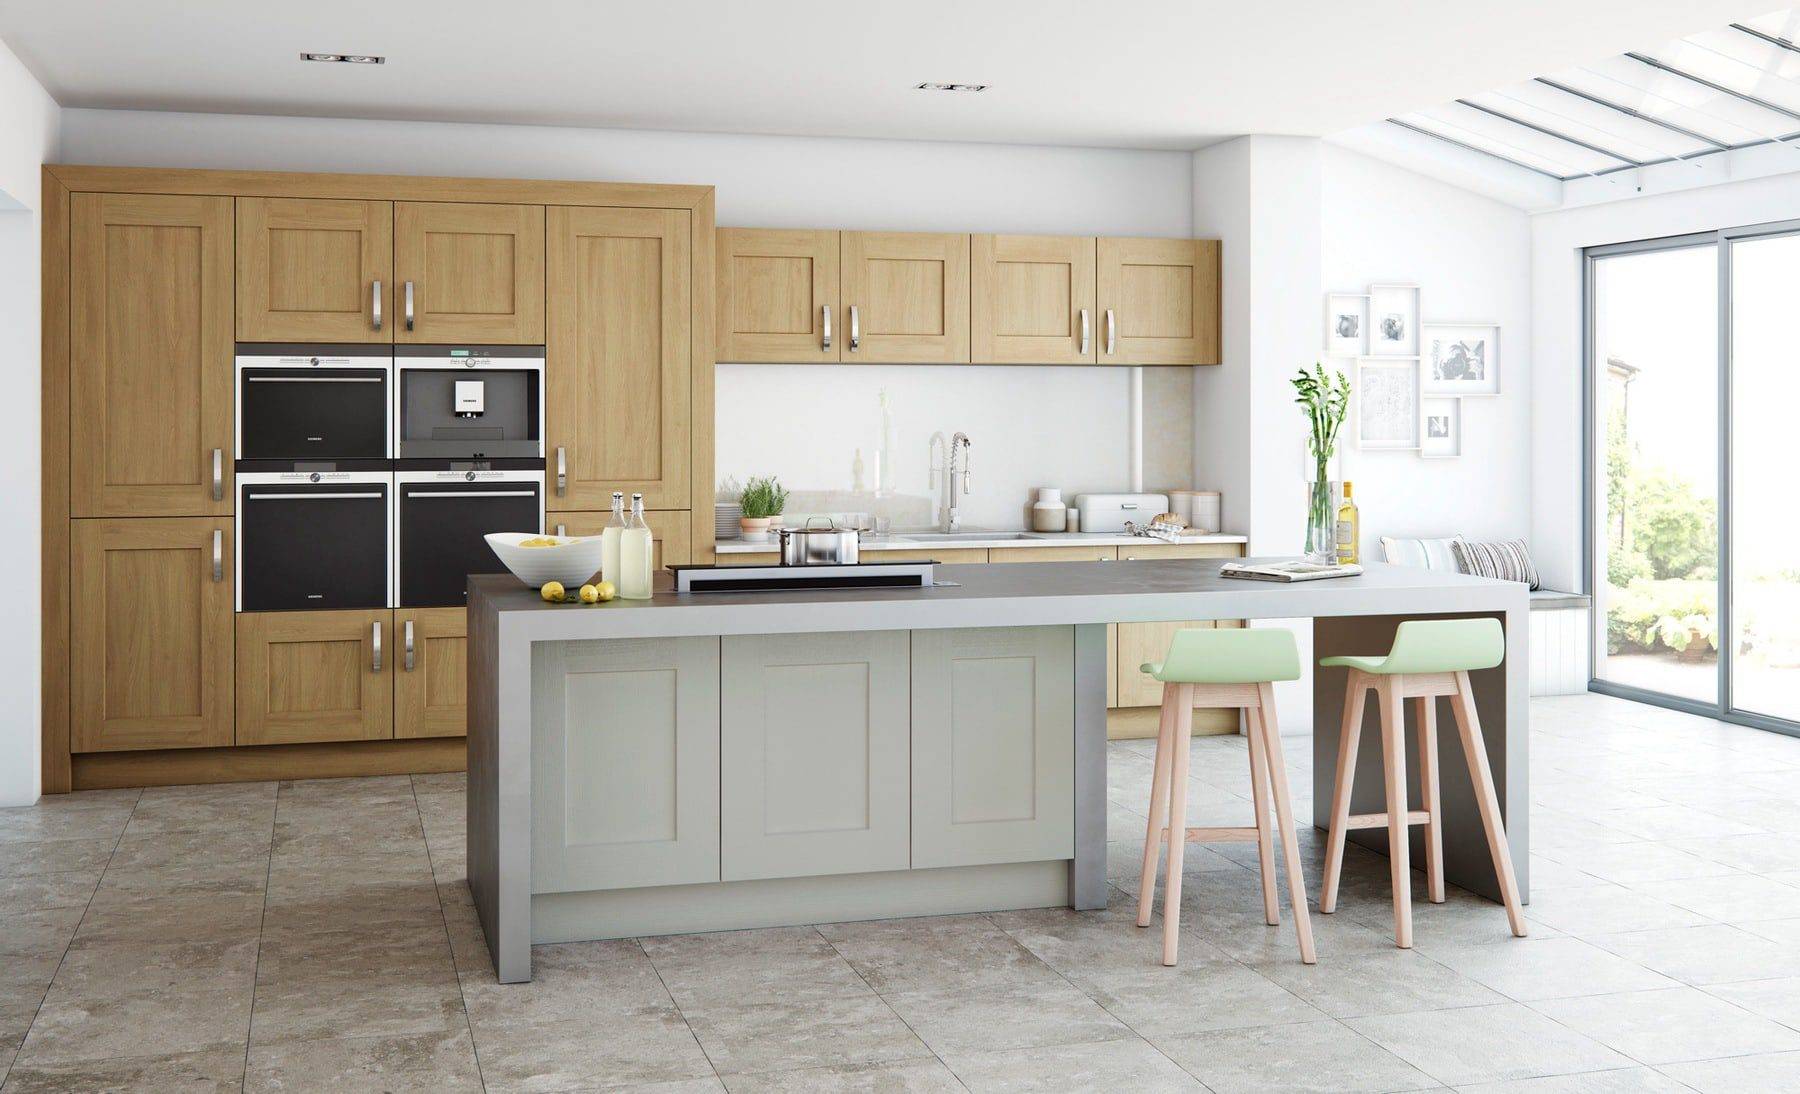 Clonmel Light Oak And Stone Shaker Kitchen With Island | Stanford Design, Upminster